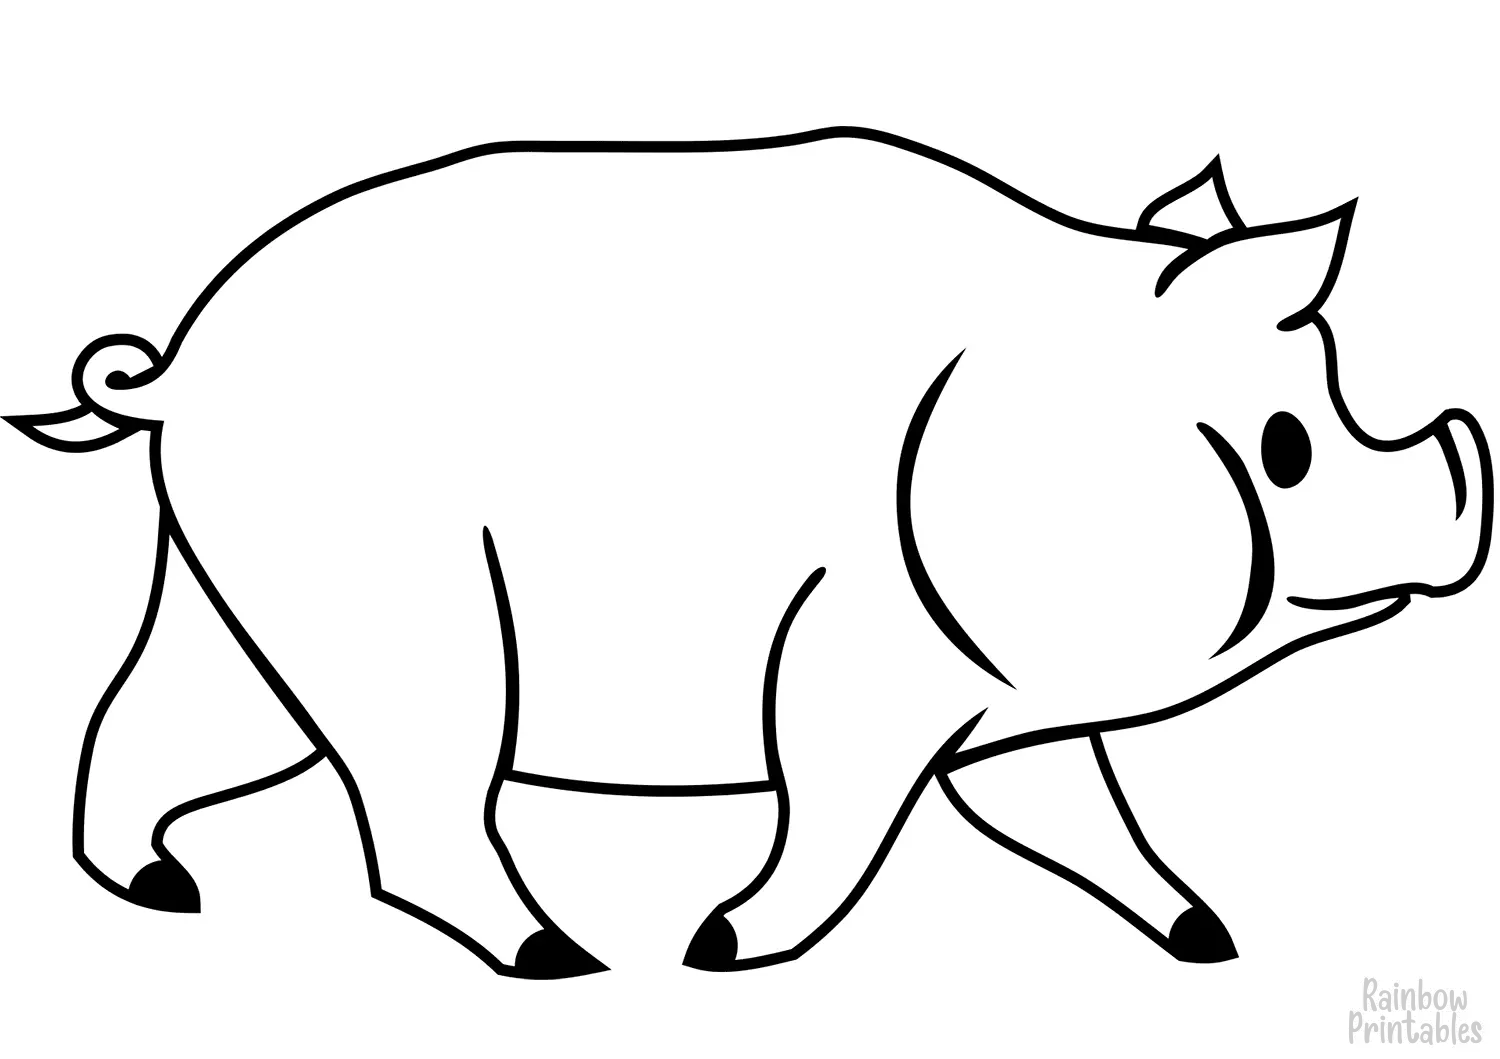 SIMPLE-EASY-line-drawings-CUTE-PIG-coloring-page-for-kids